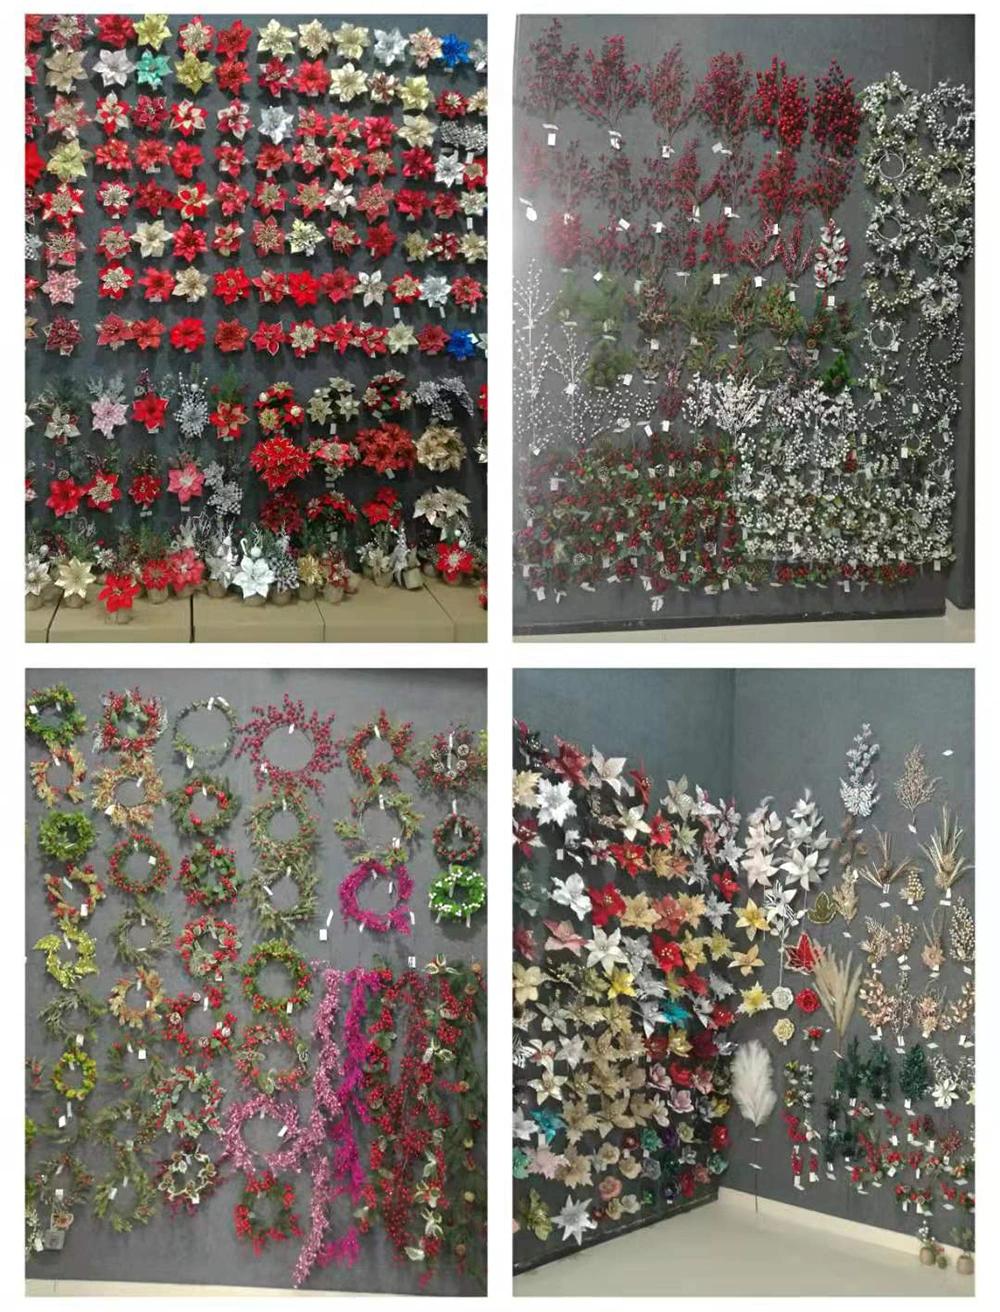 High Quality Artificial Silk Real Touch Rose Flowers Latex Coated Wedding Party Birthday Christmas Decoration Showroom